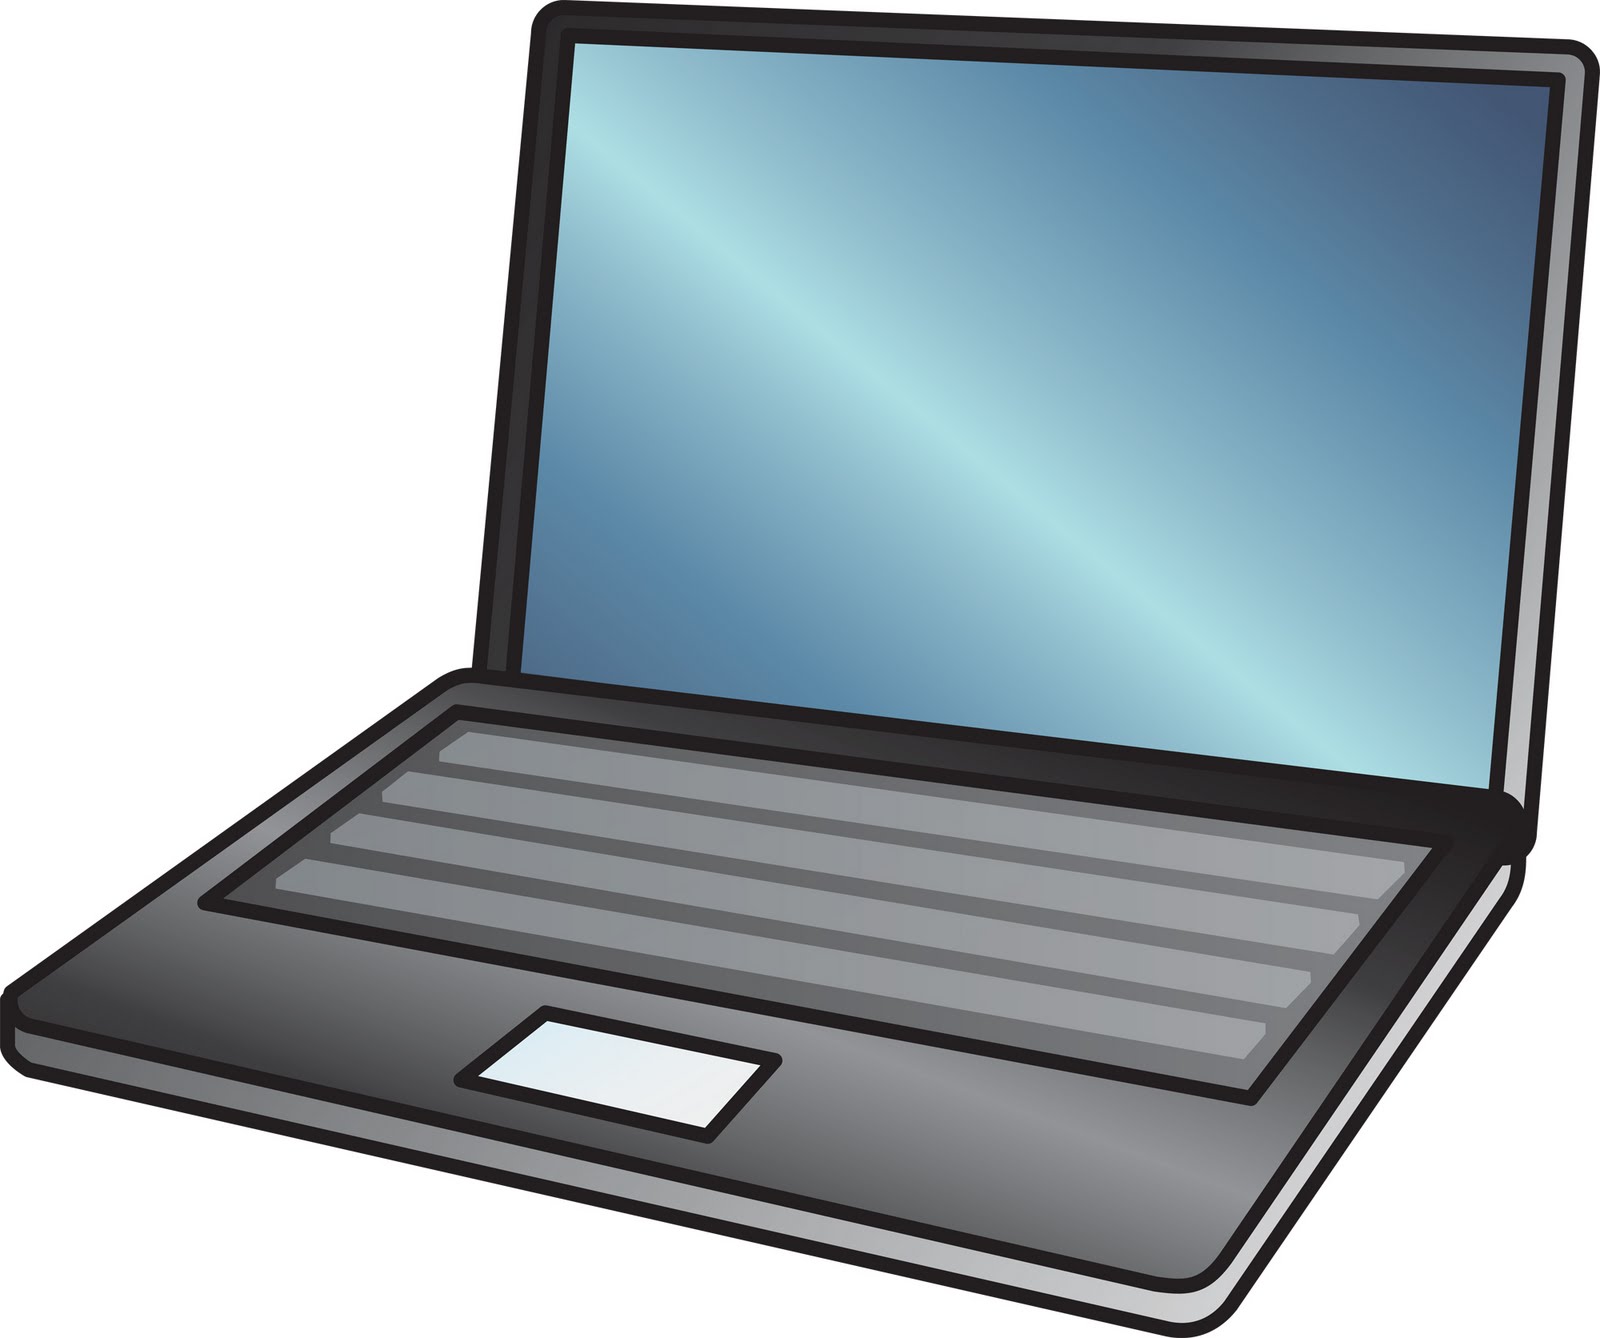 Laptop clipart images and notebook clip art photo share submit